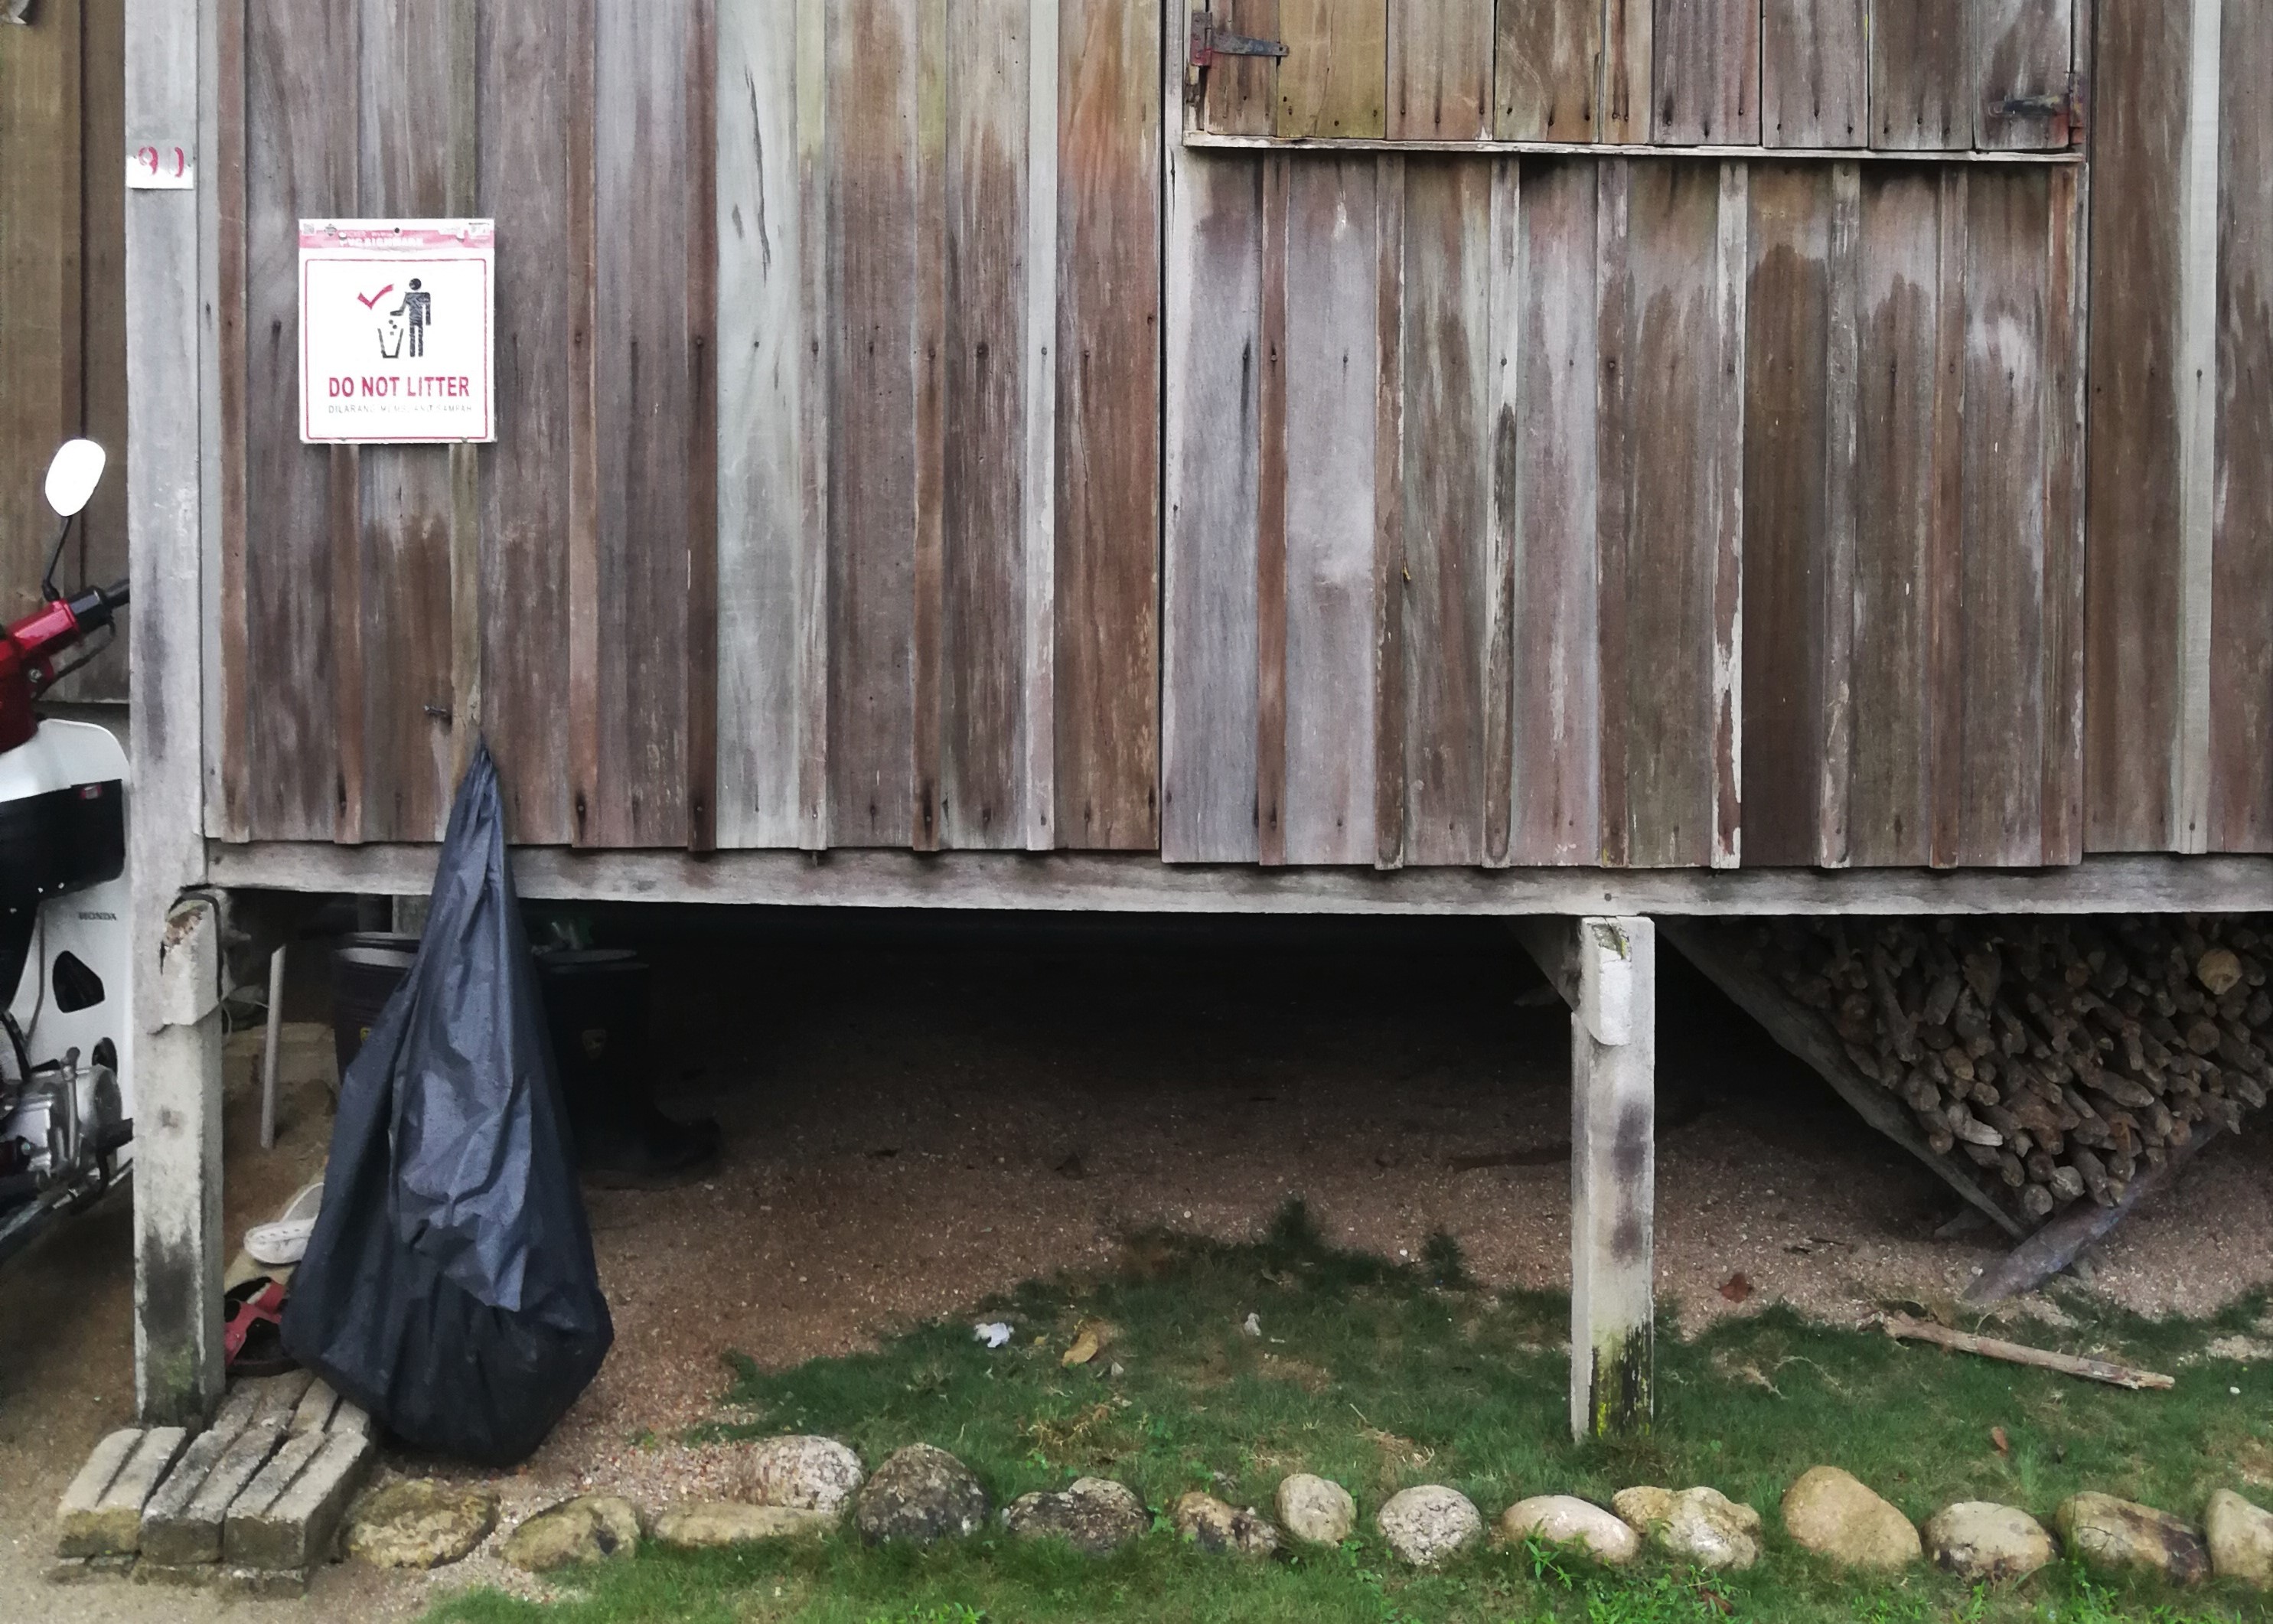 Garbage bags are placed outside chalets with signs reminding visitors to dispose their litter properly, to keep the environment pristine.